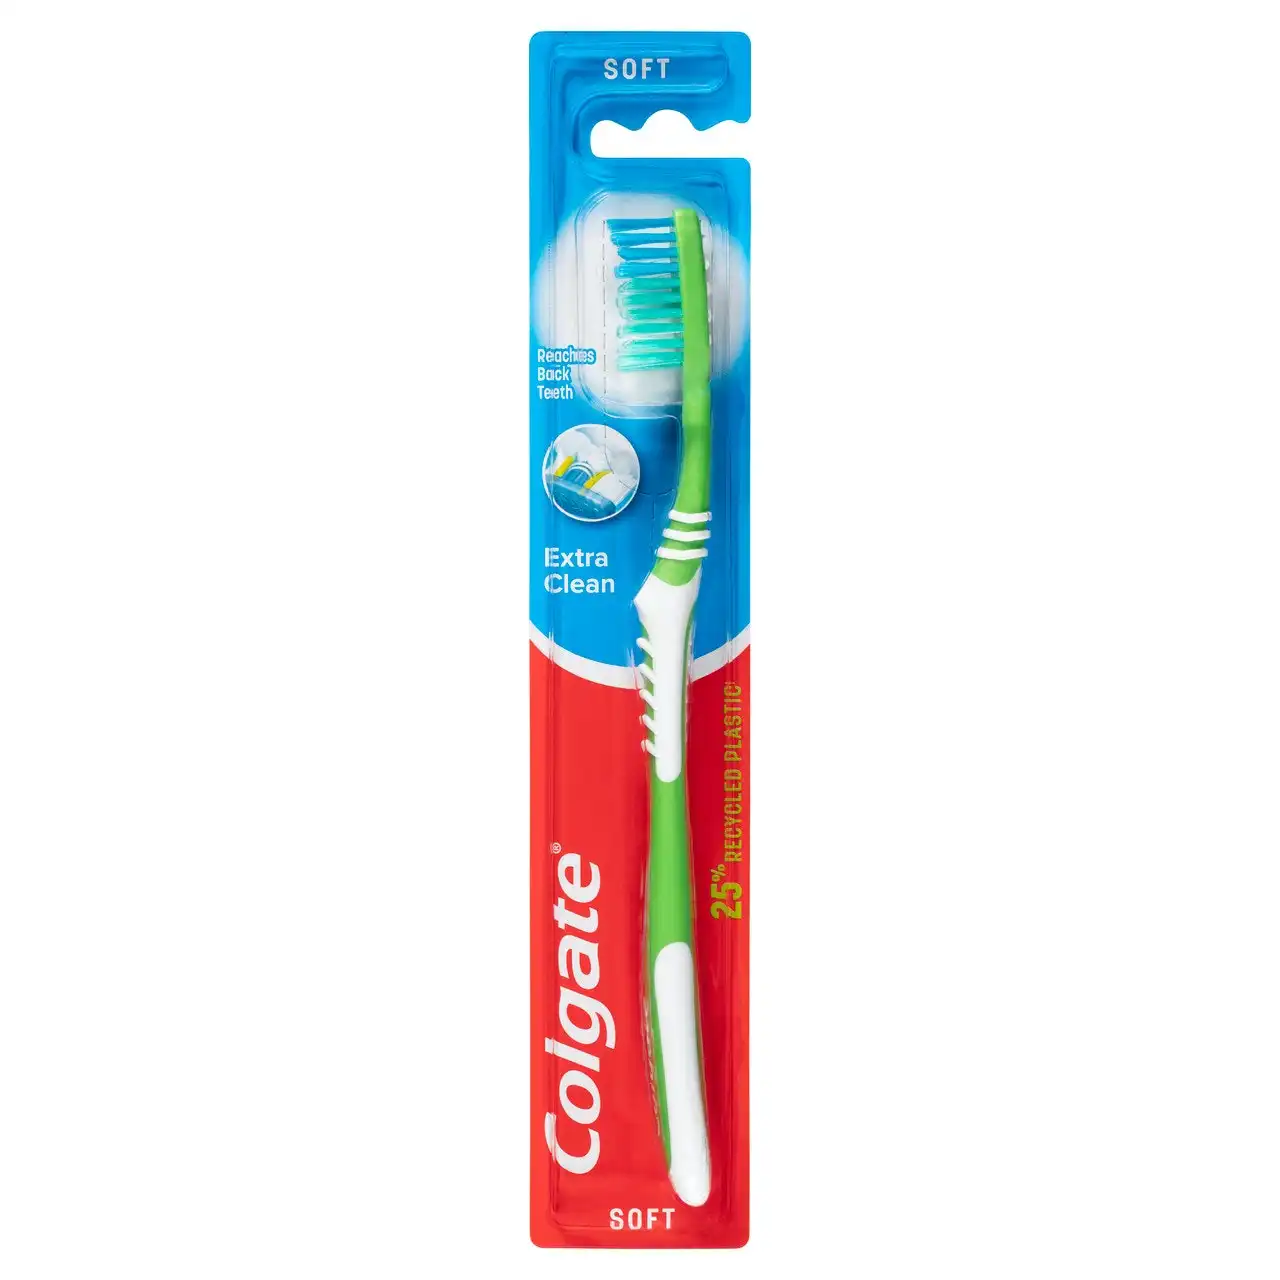 Colgate Extra Clean Manual Toothbrush, 1 Pack, Soft Bristles, 25% Recycled Plastic Handle